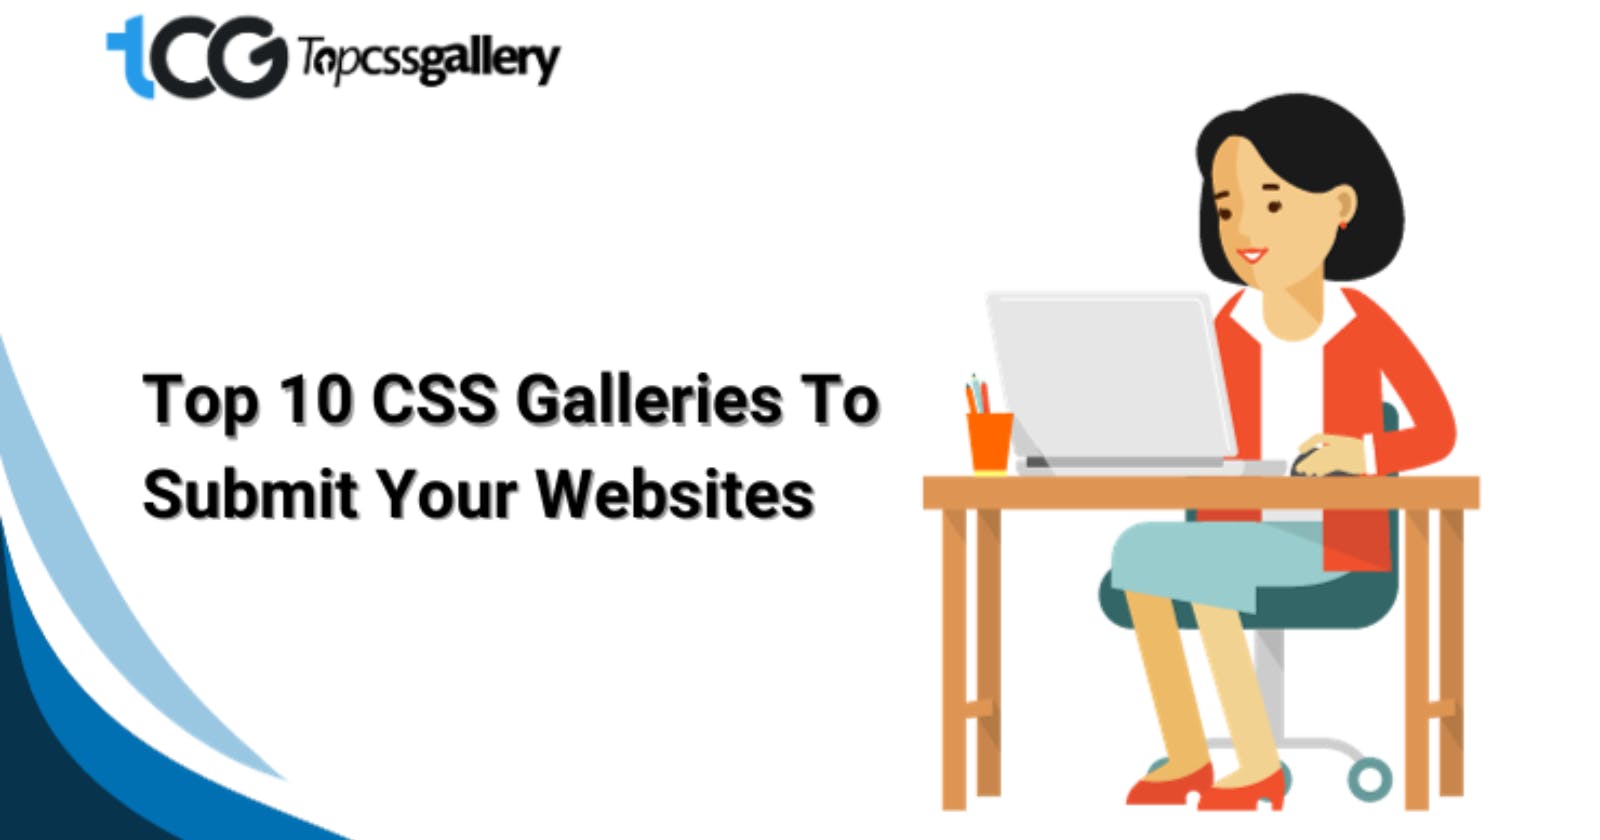 Top 10 CSS Galleries To Submit Your Websites